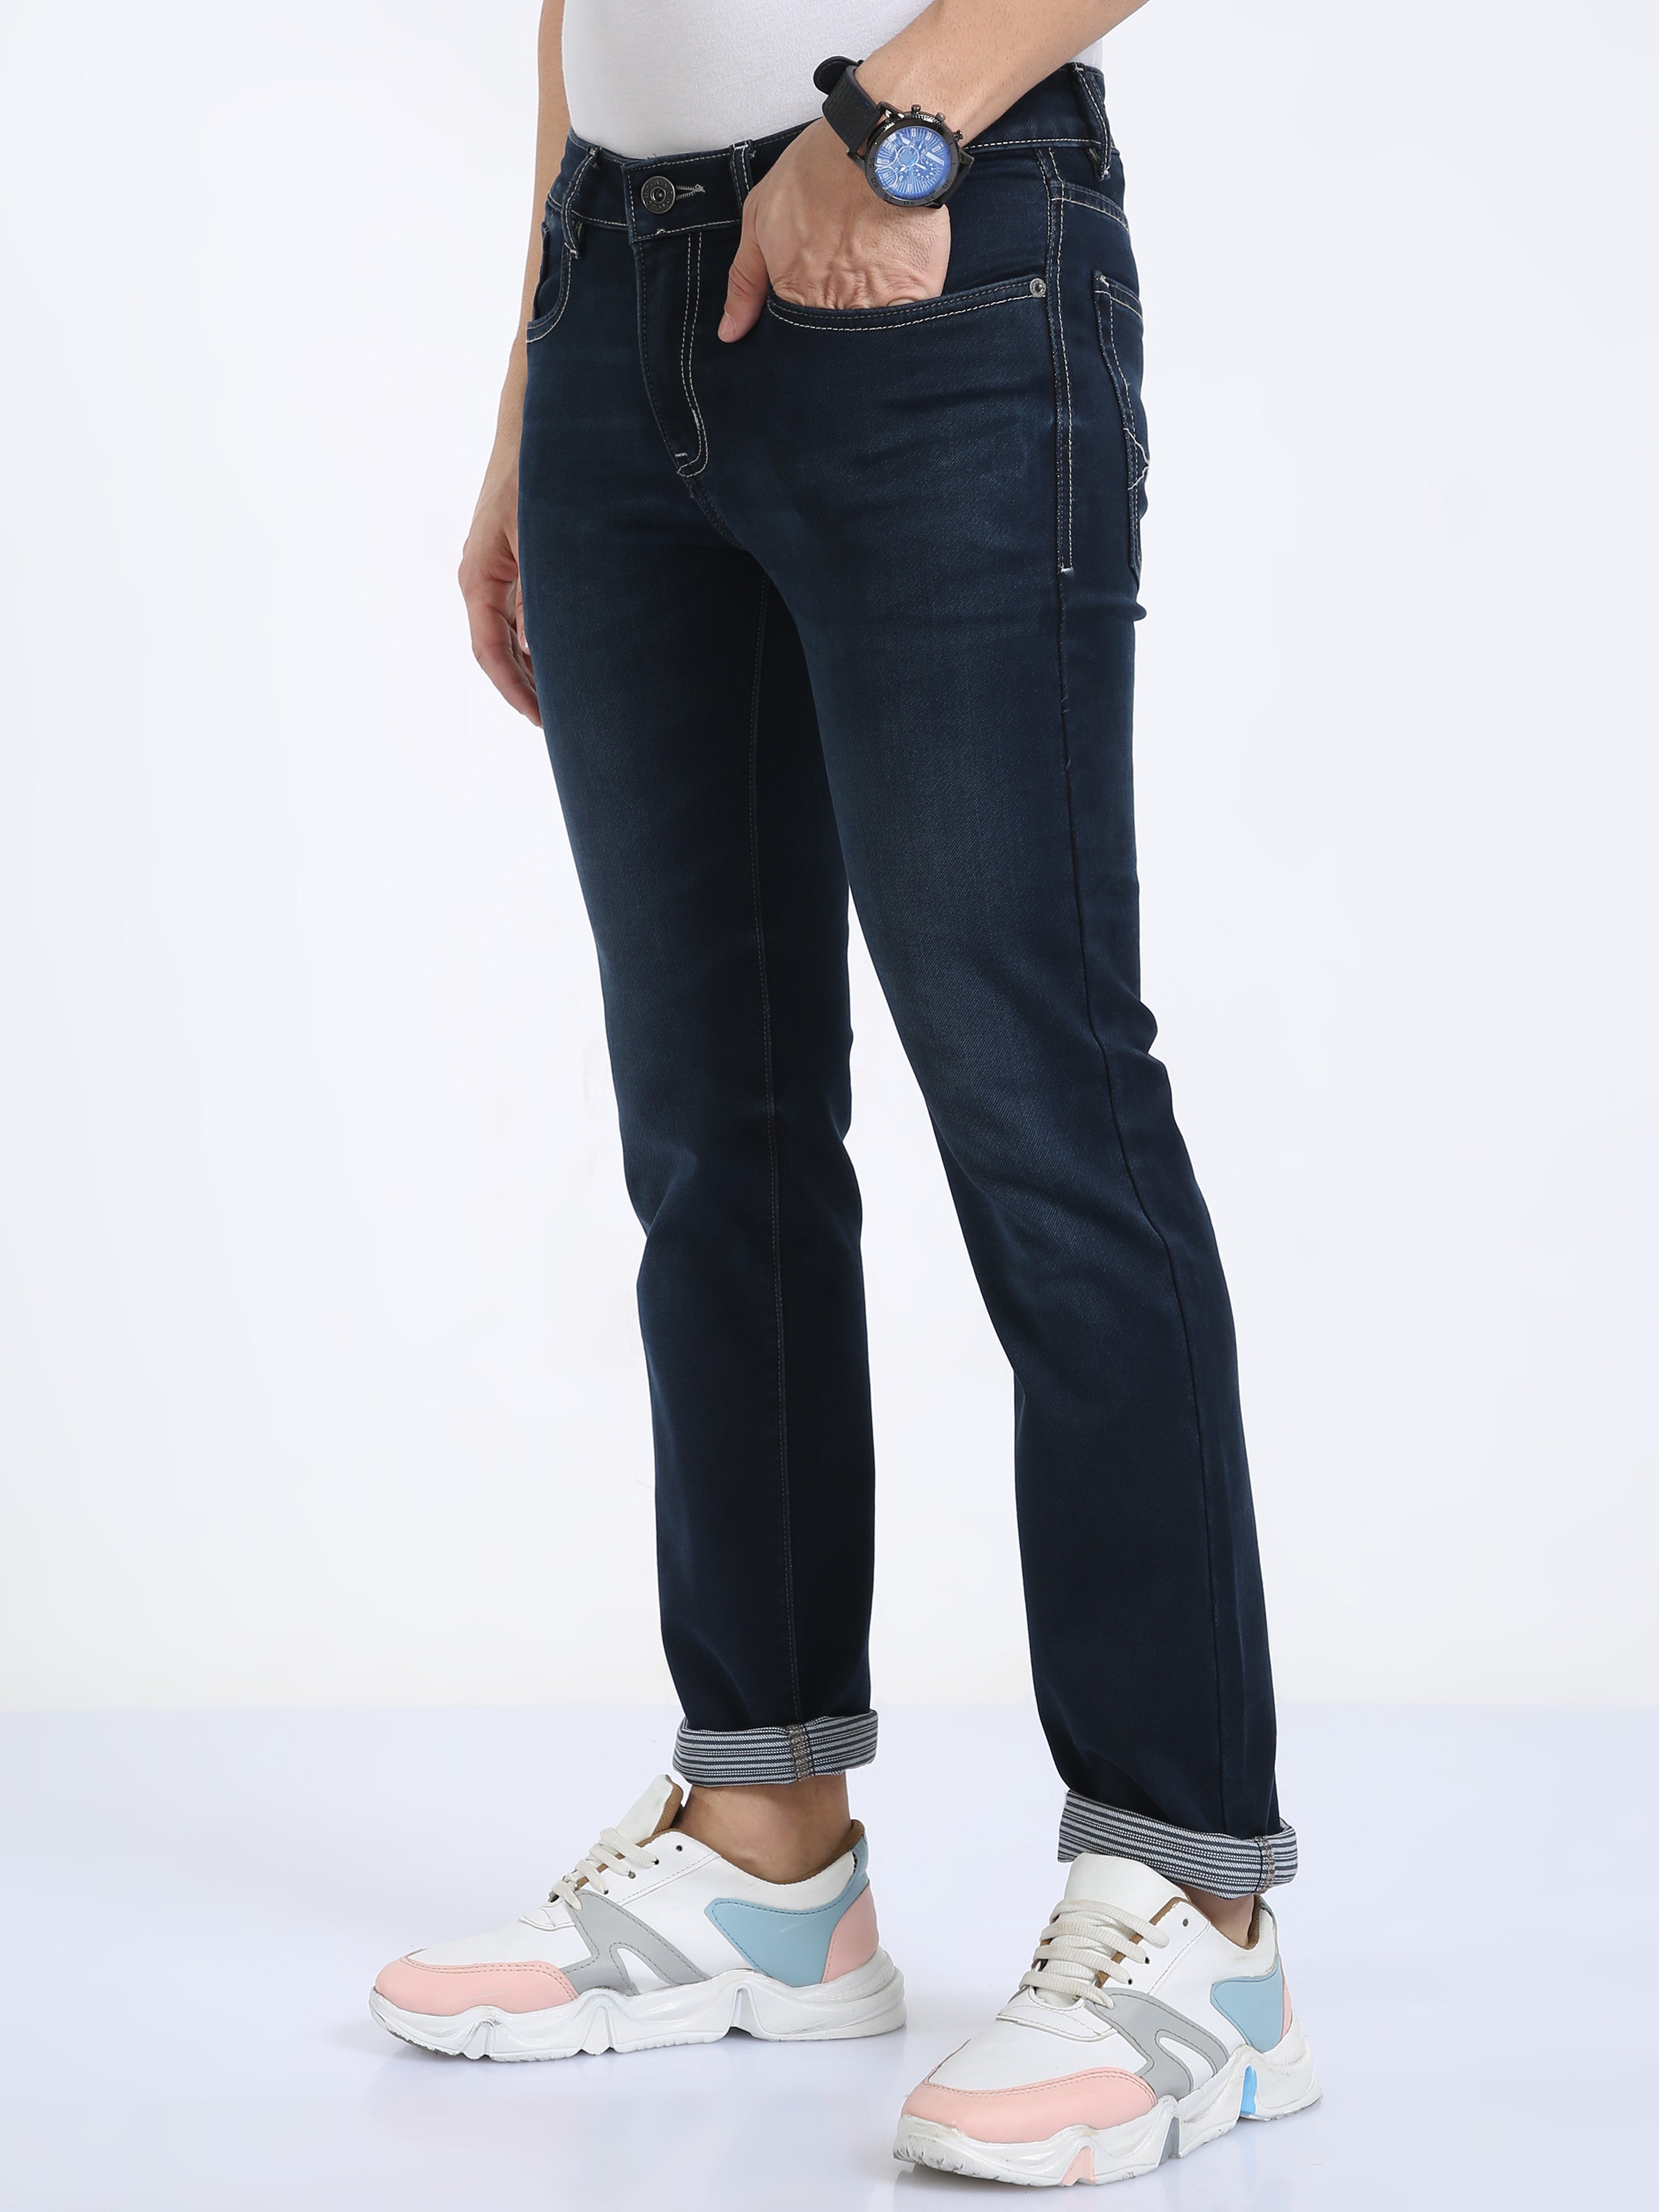 Cotton Jeans for Men, Comfortable Fit in Thane at best price by Rajhans  Exim - Justdial